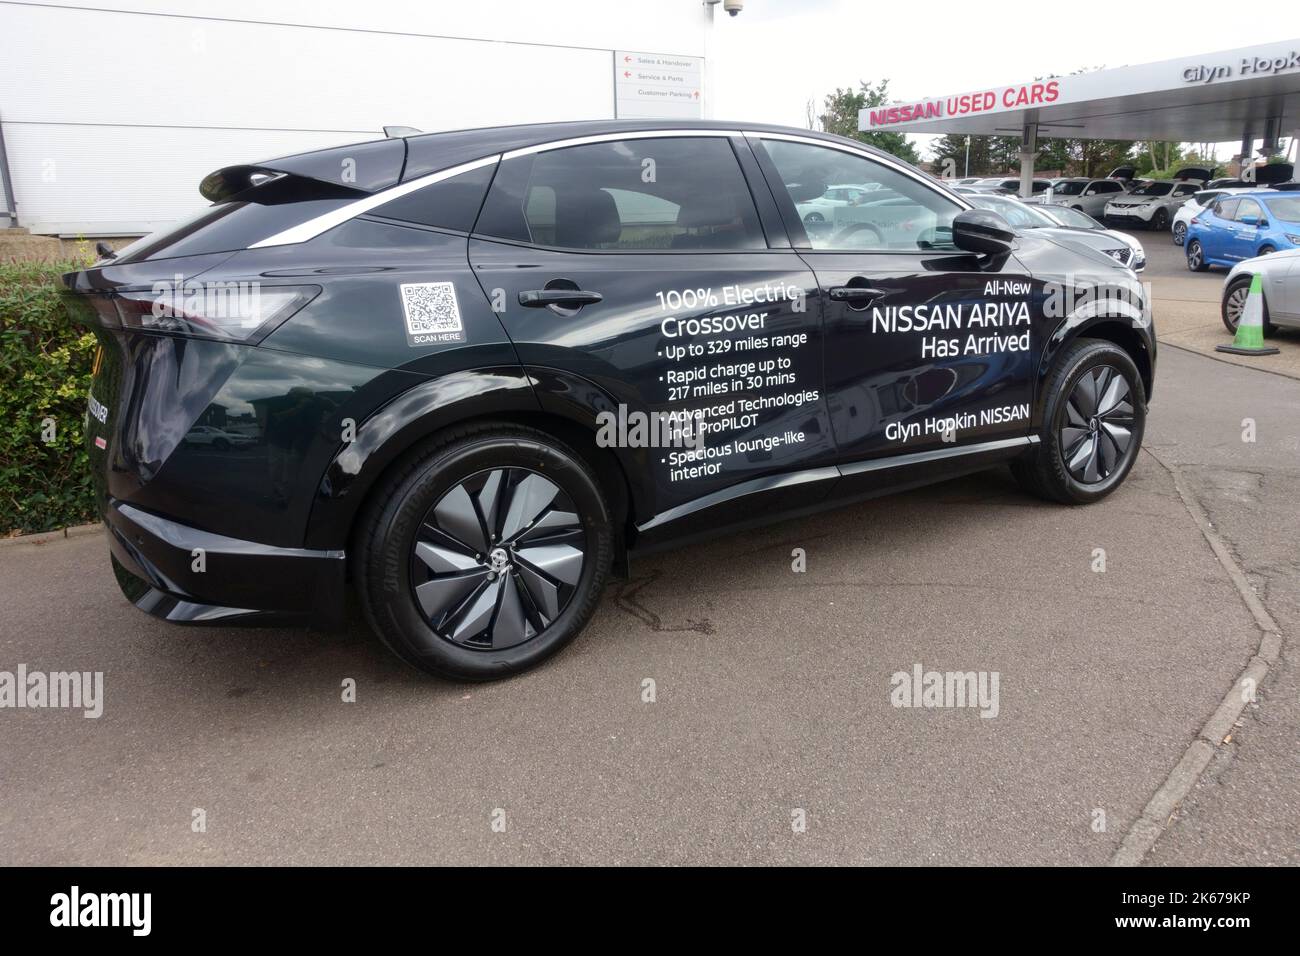 New Nissan Ariya crossover electric car with signage text promoting its credentials Glyn Hopkin Romford UK Stock Photo